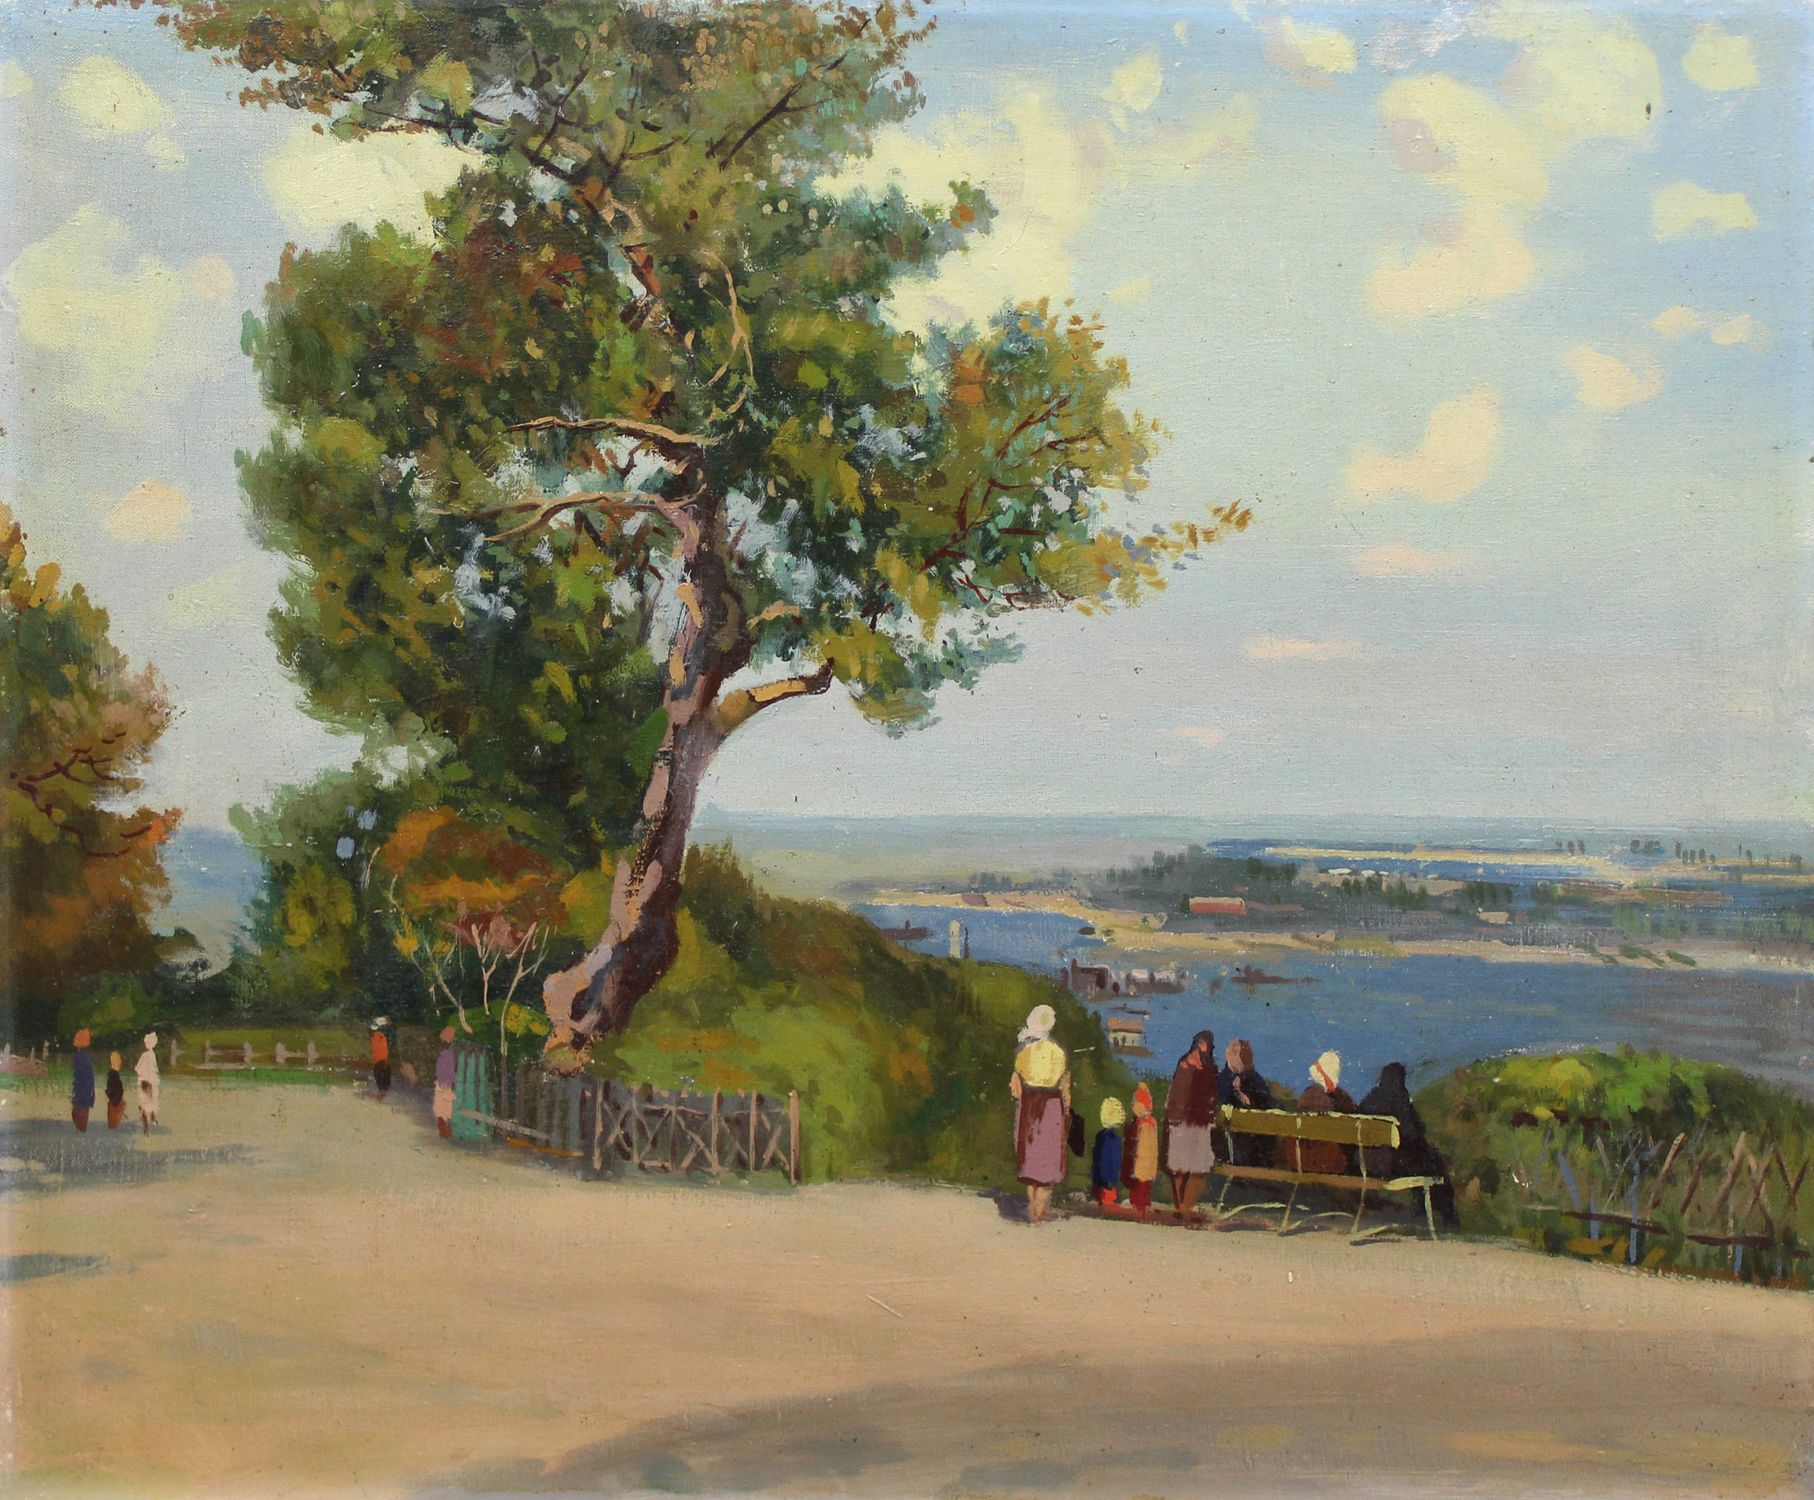 "View of the Dnieper river"